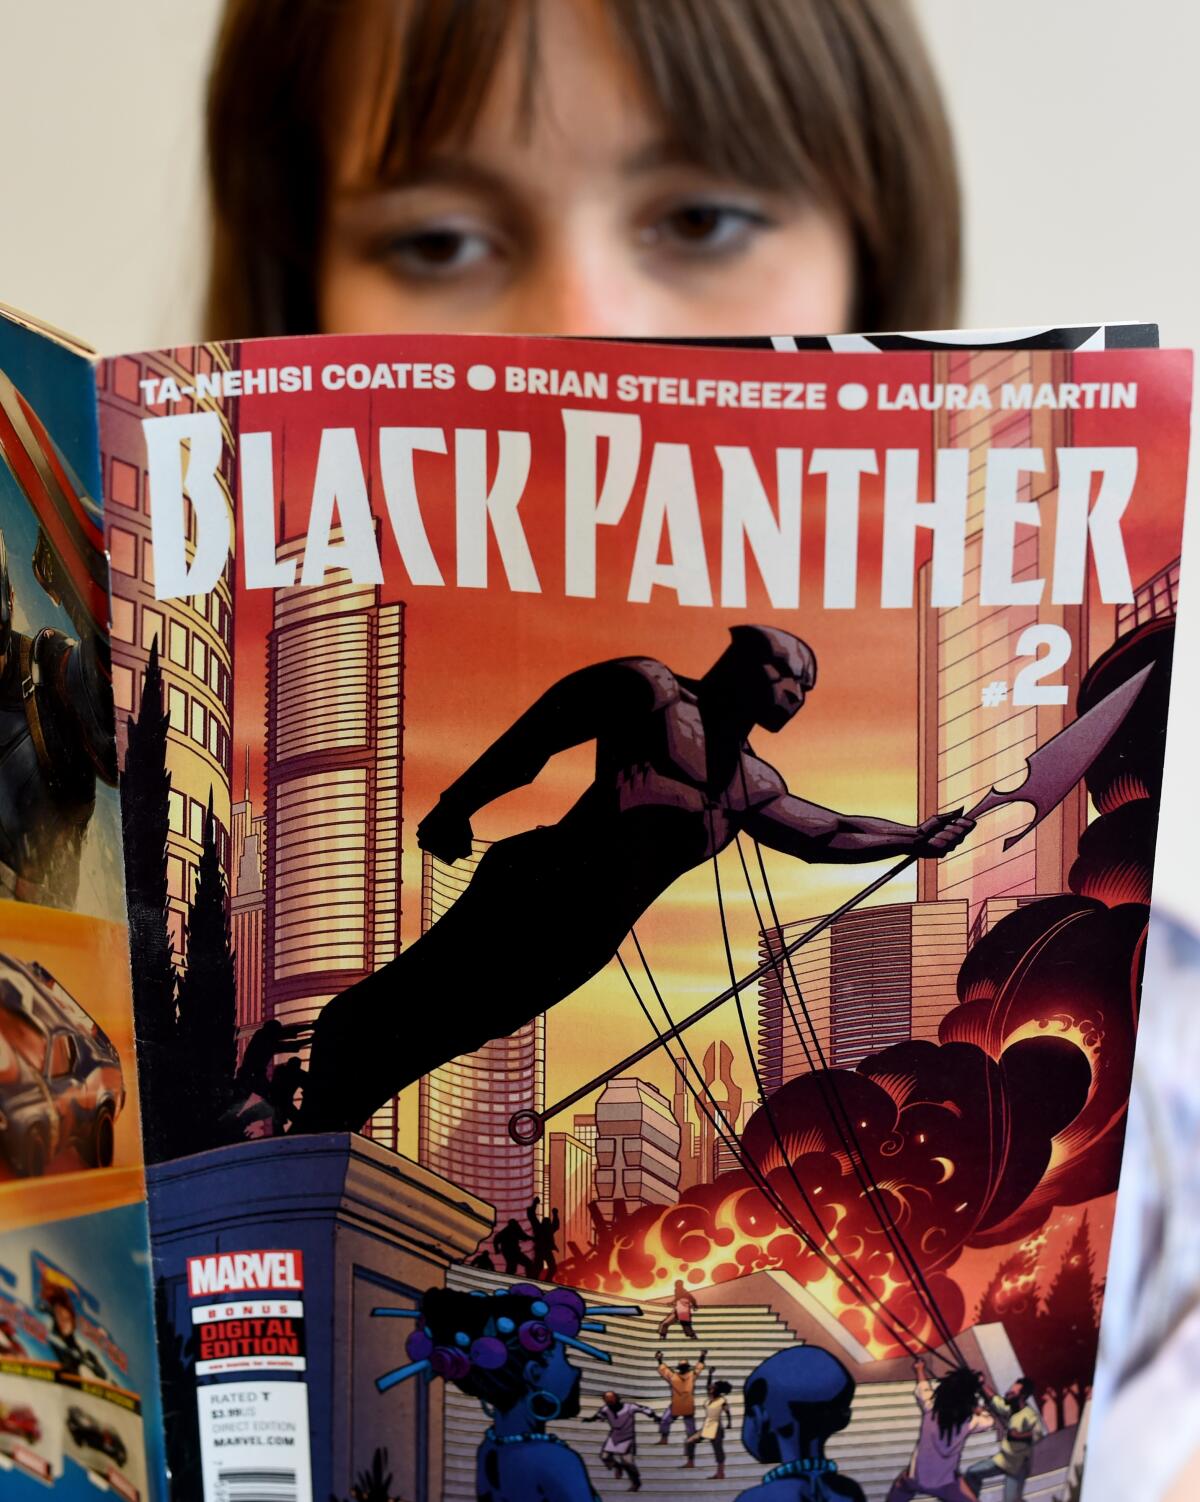 A woman reads the comic "Black Panther"